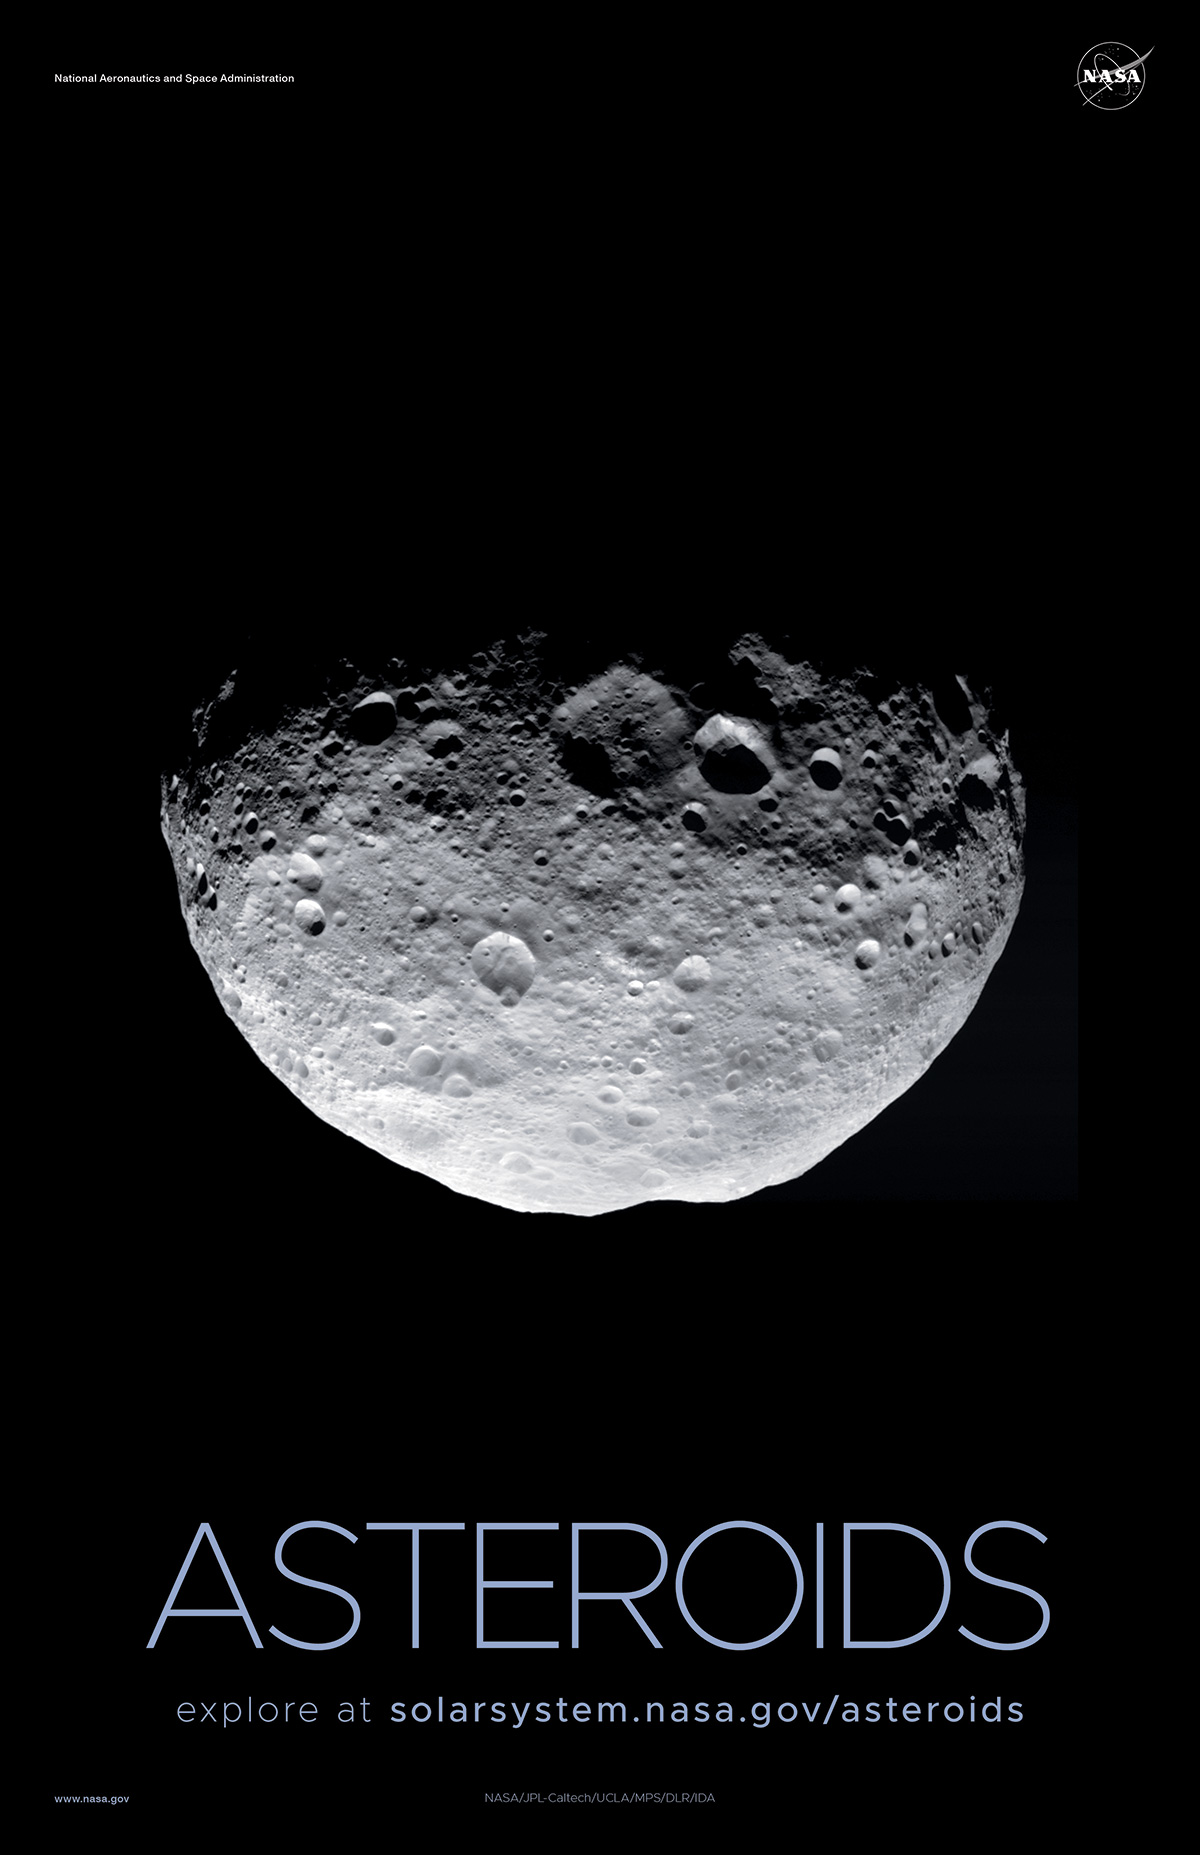 A movie-style asteroid poster.